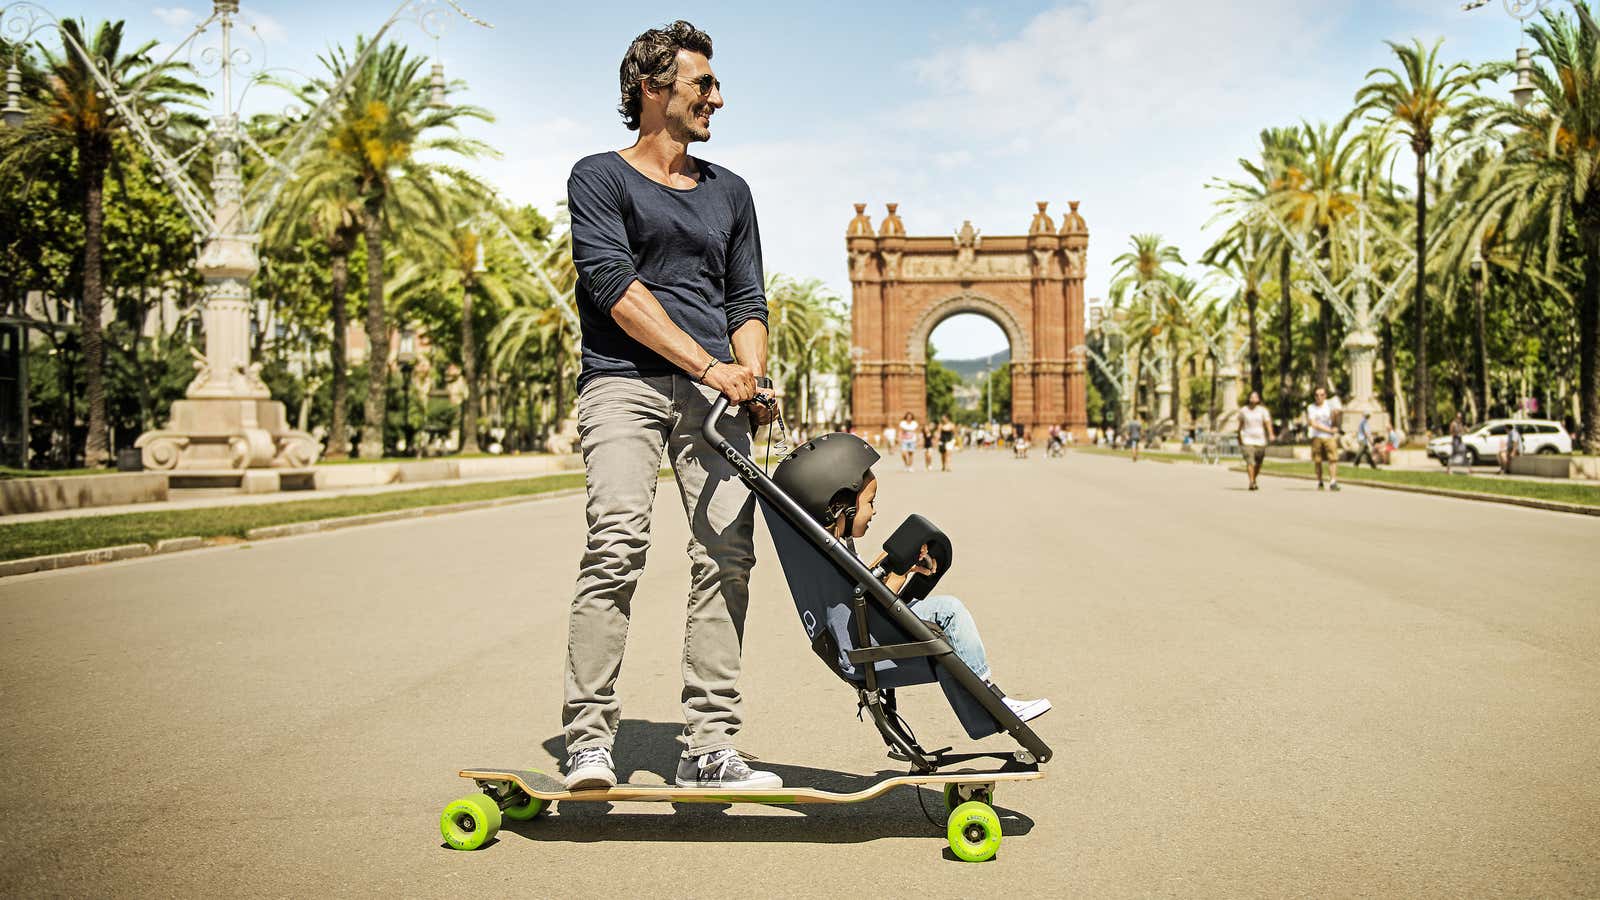 A brand-new skateboard stroller reimagines the future of baby transport